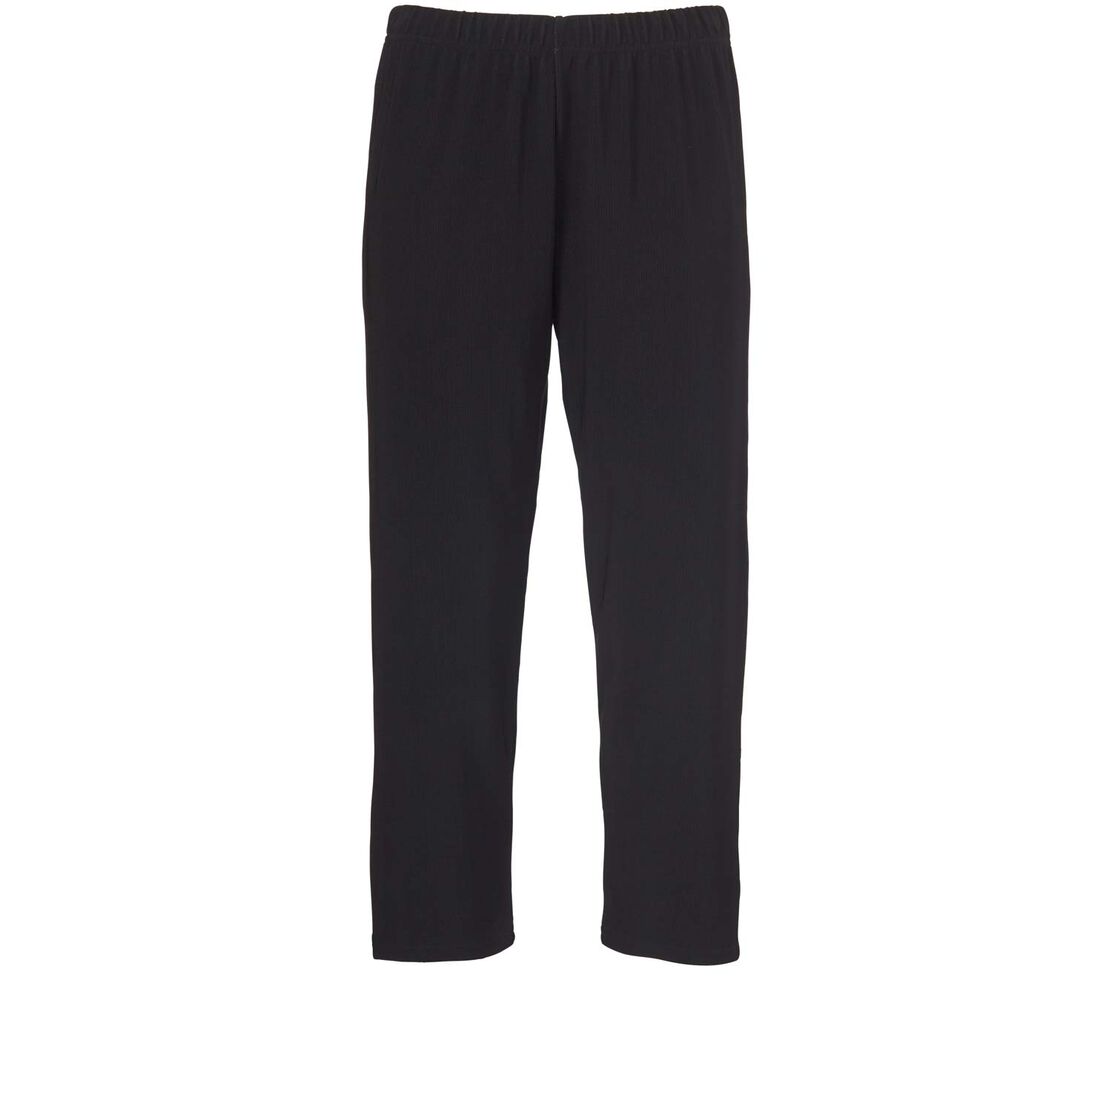 POLLY TROUSERS, Black, hi-res